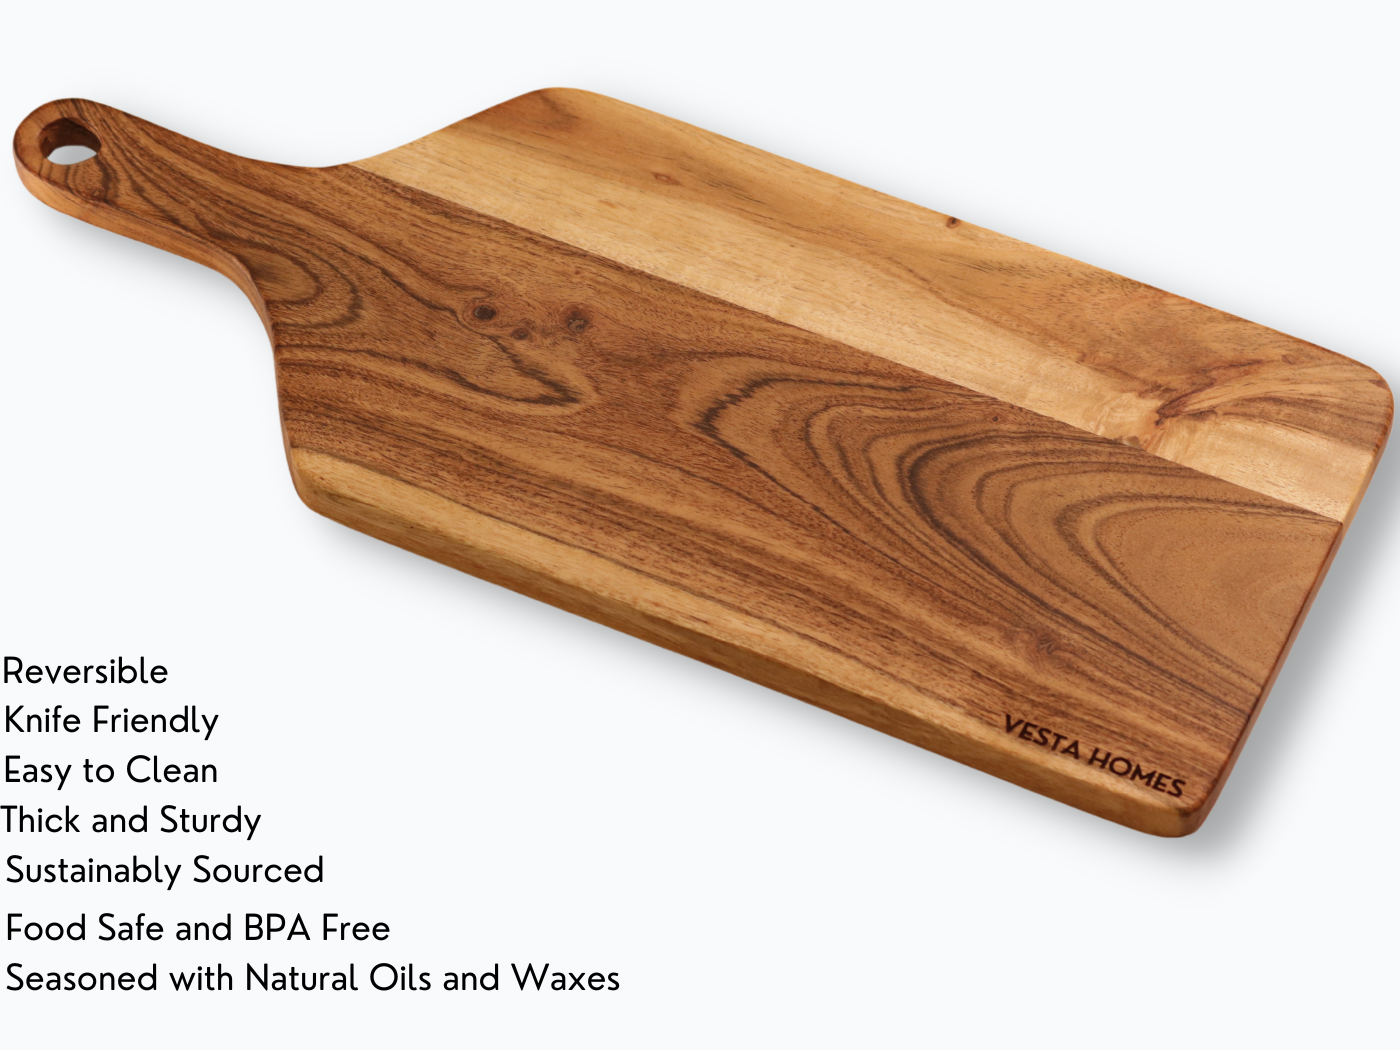 Features of a wooden chopping board